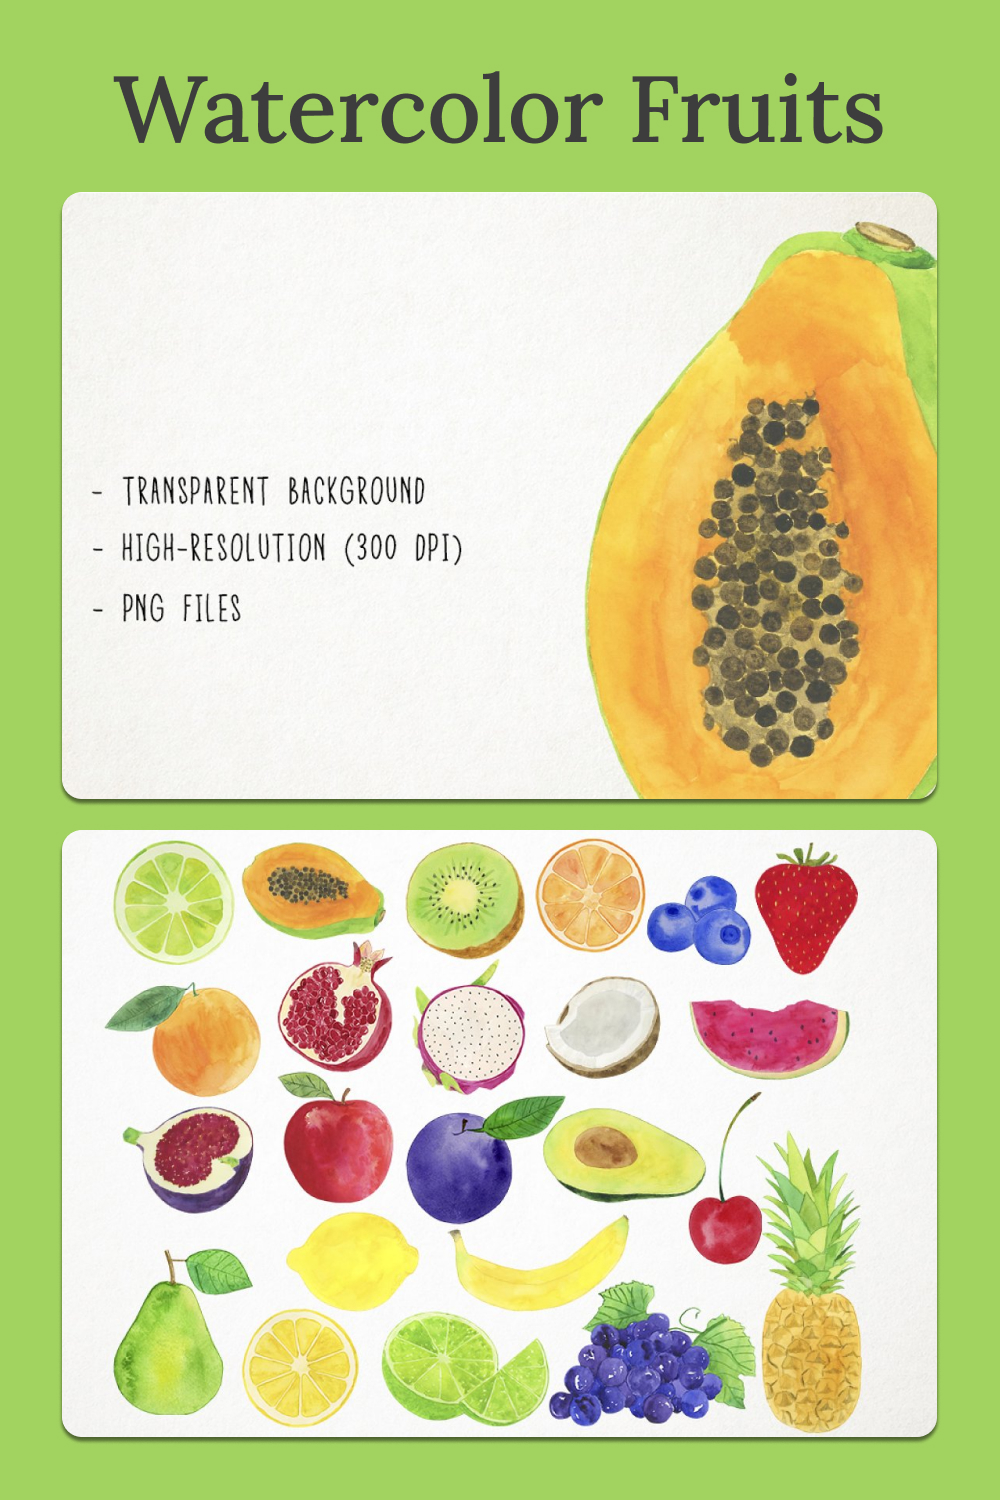 Watercolor fruits clipart of pinterest.